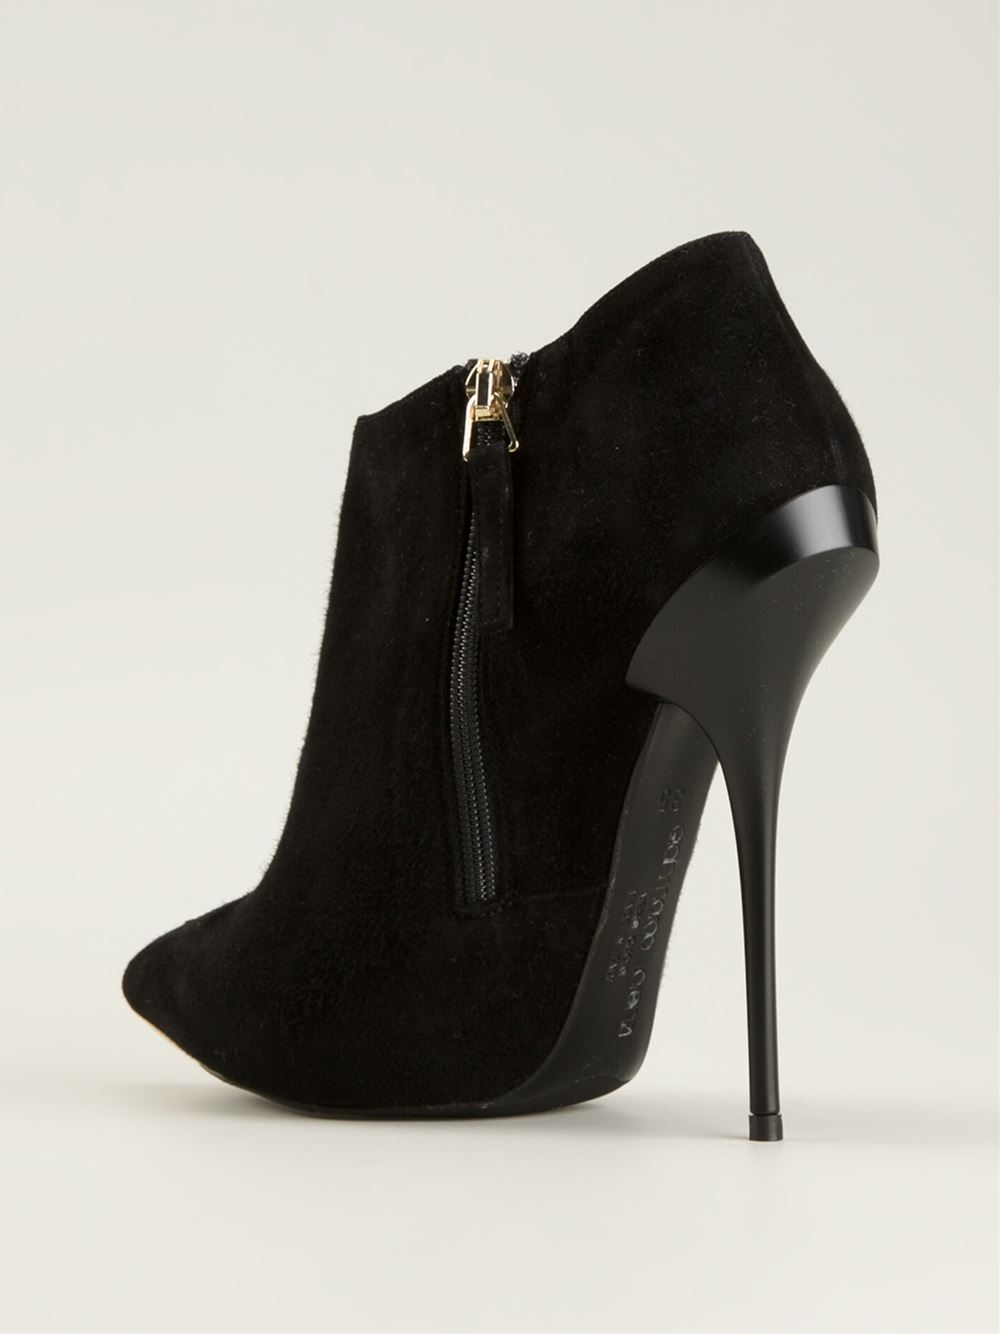 Gianmarco lorenzi Pointed Toe Ankle Boots in Black | Lyst